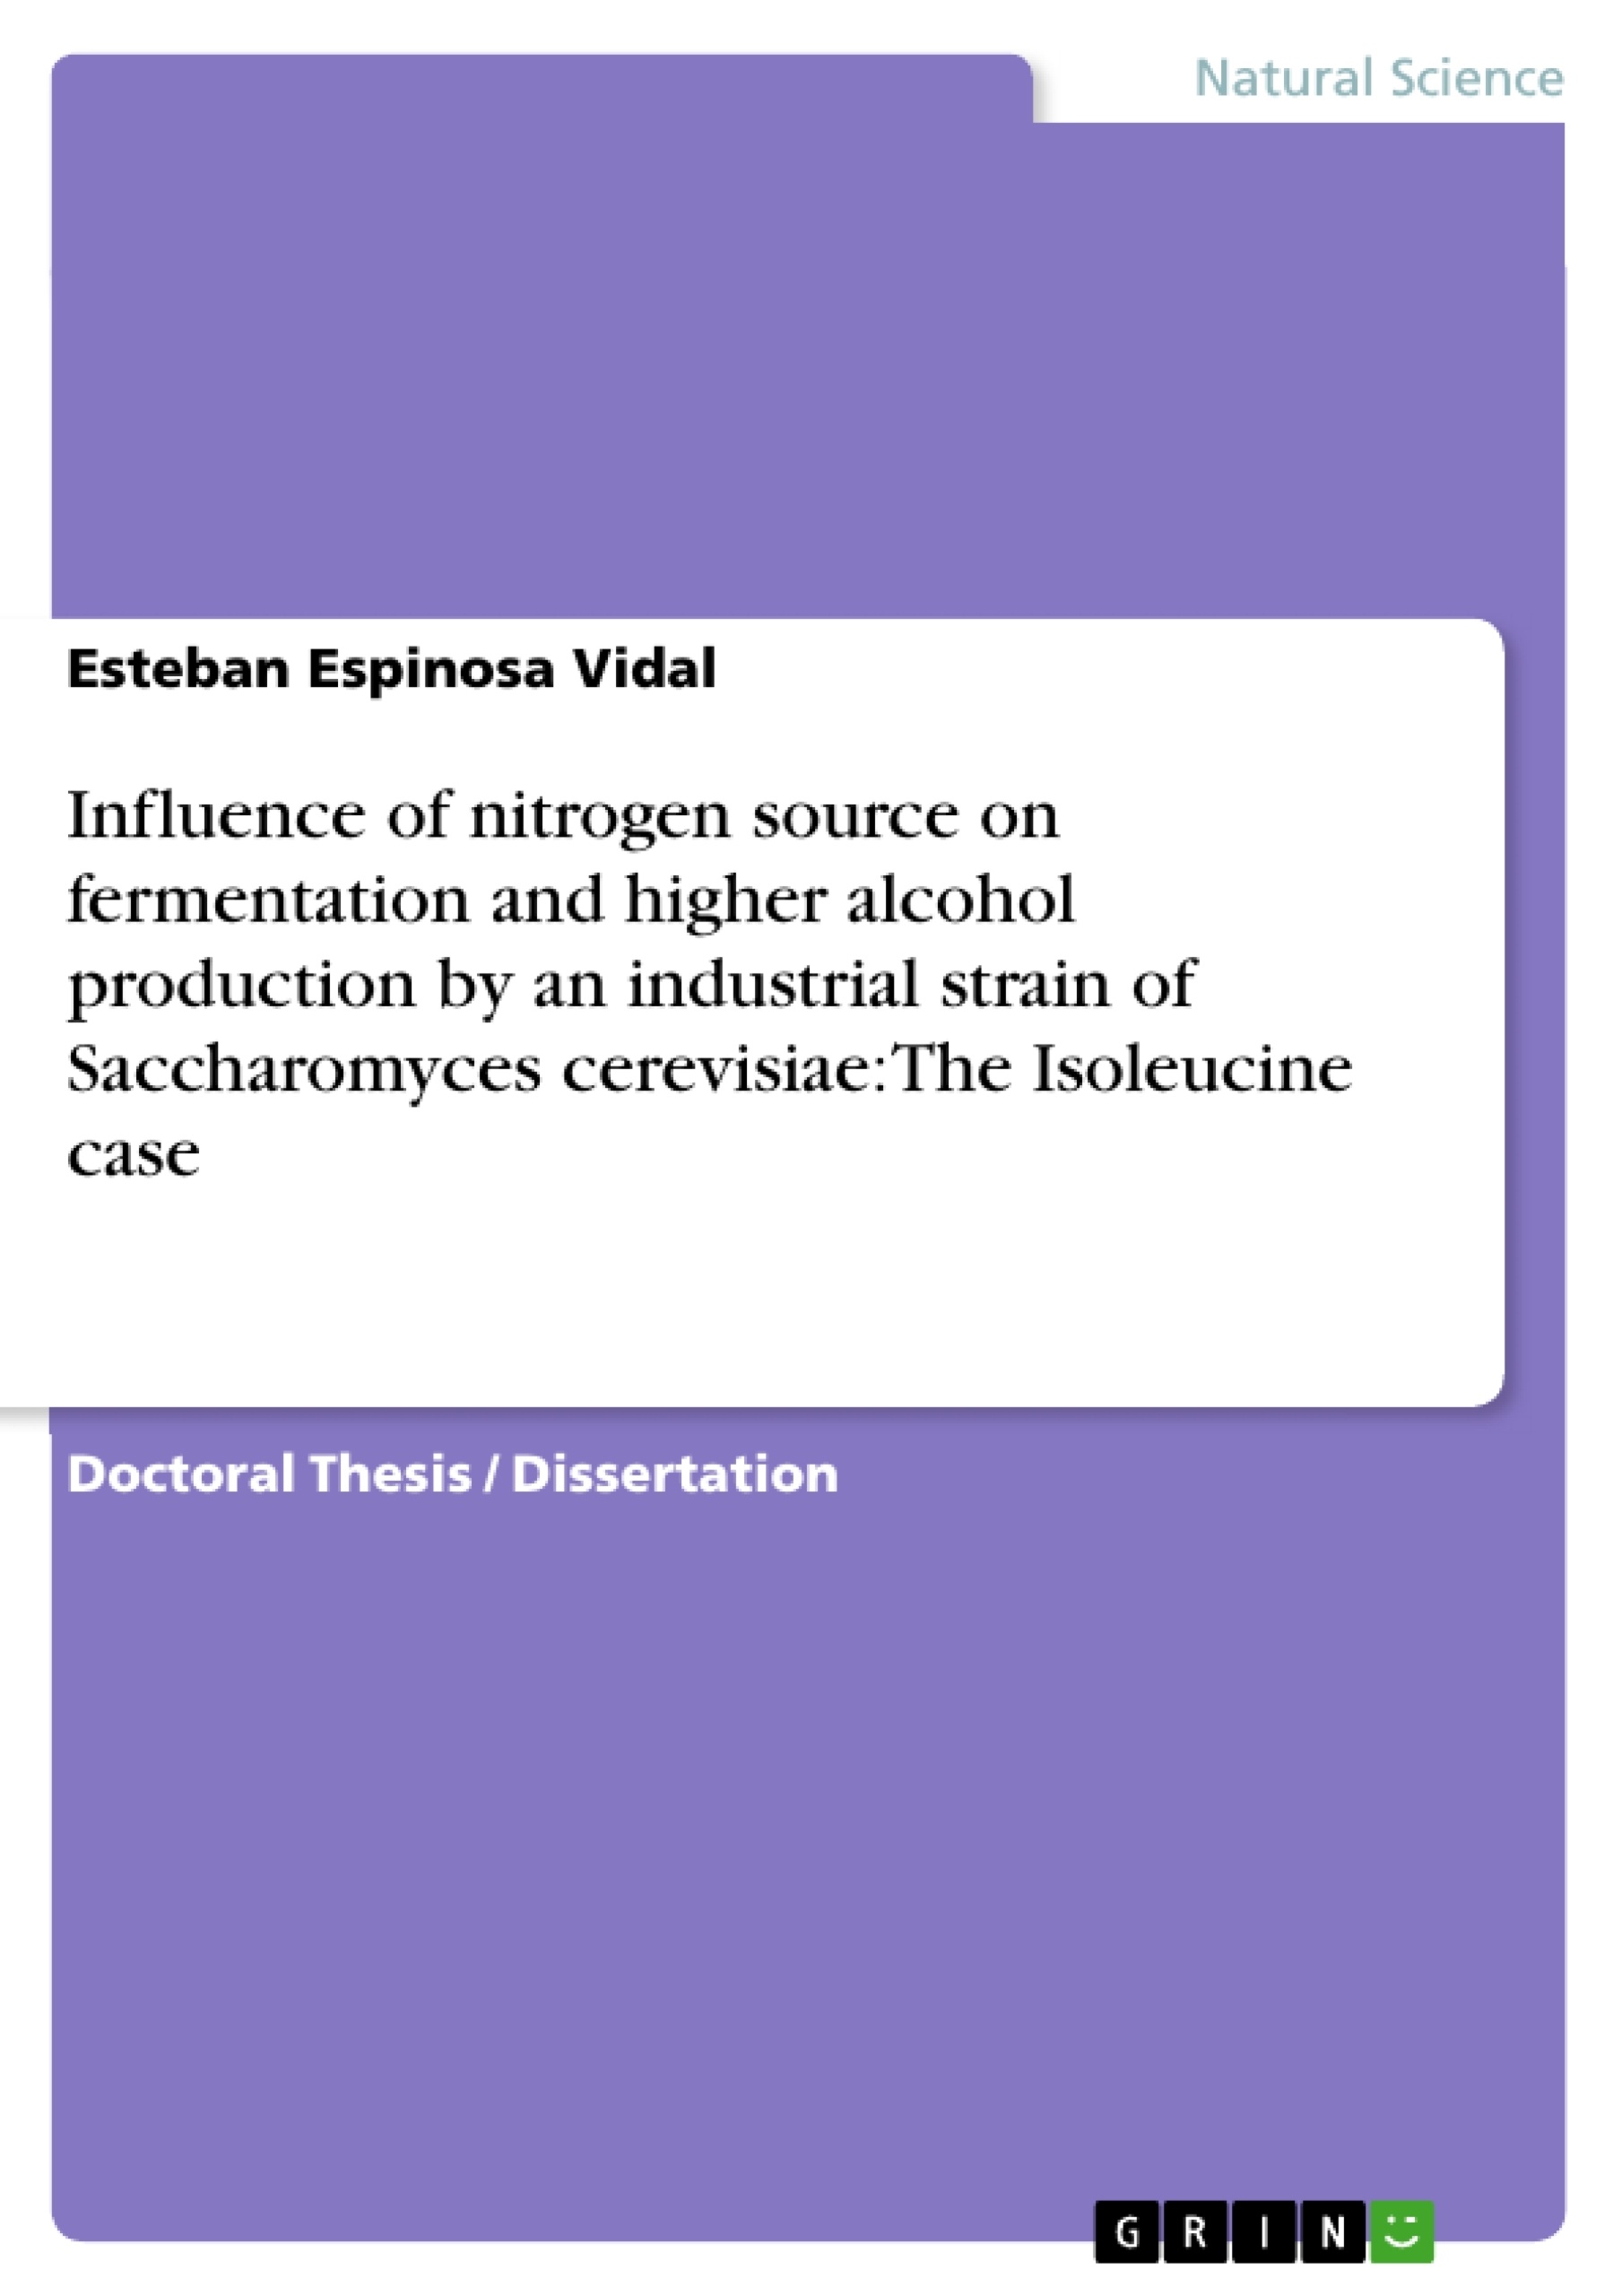 Title: Influence of nitrogen source on fermentation and higher alcohol production by an industrial strain of Saccharomyces cerevisiae: The Isoleucine case